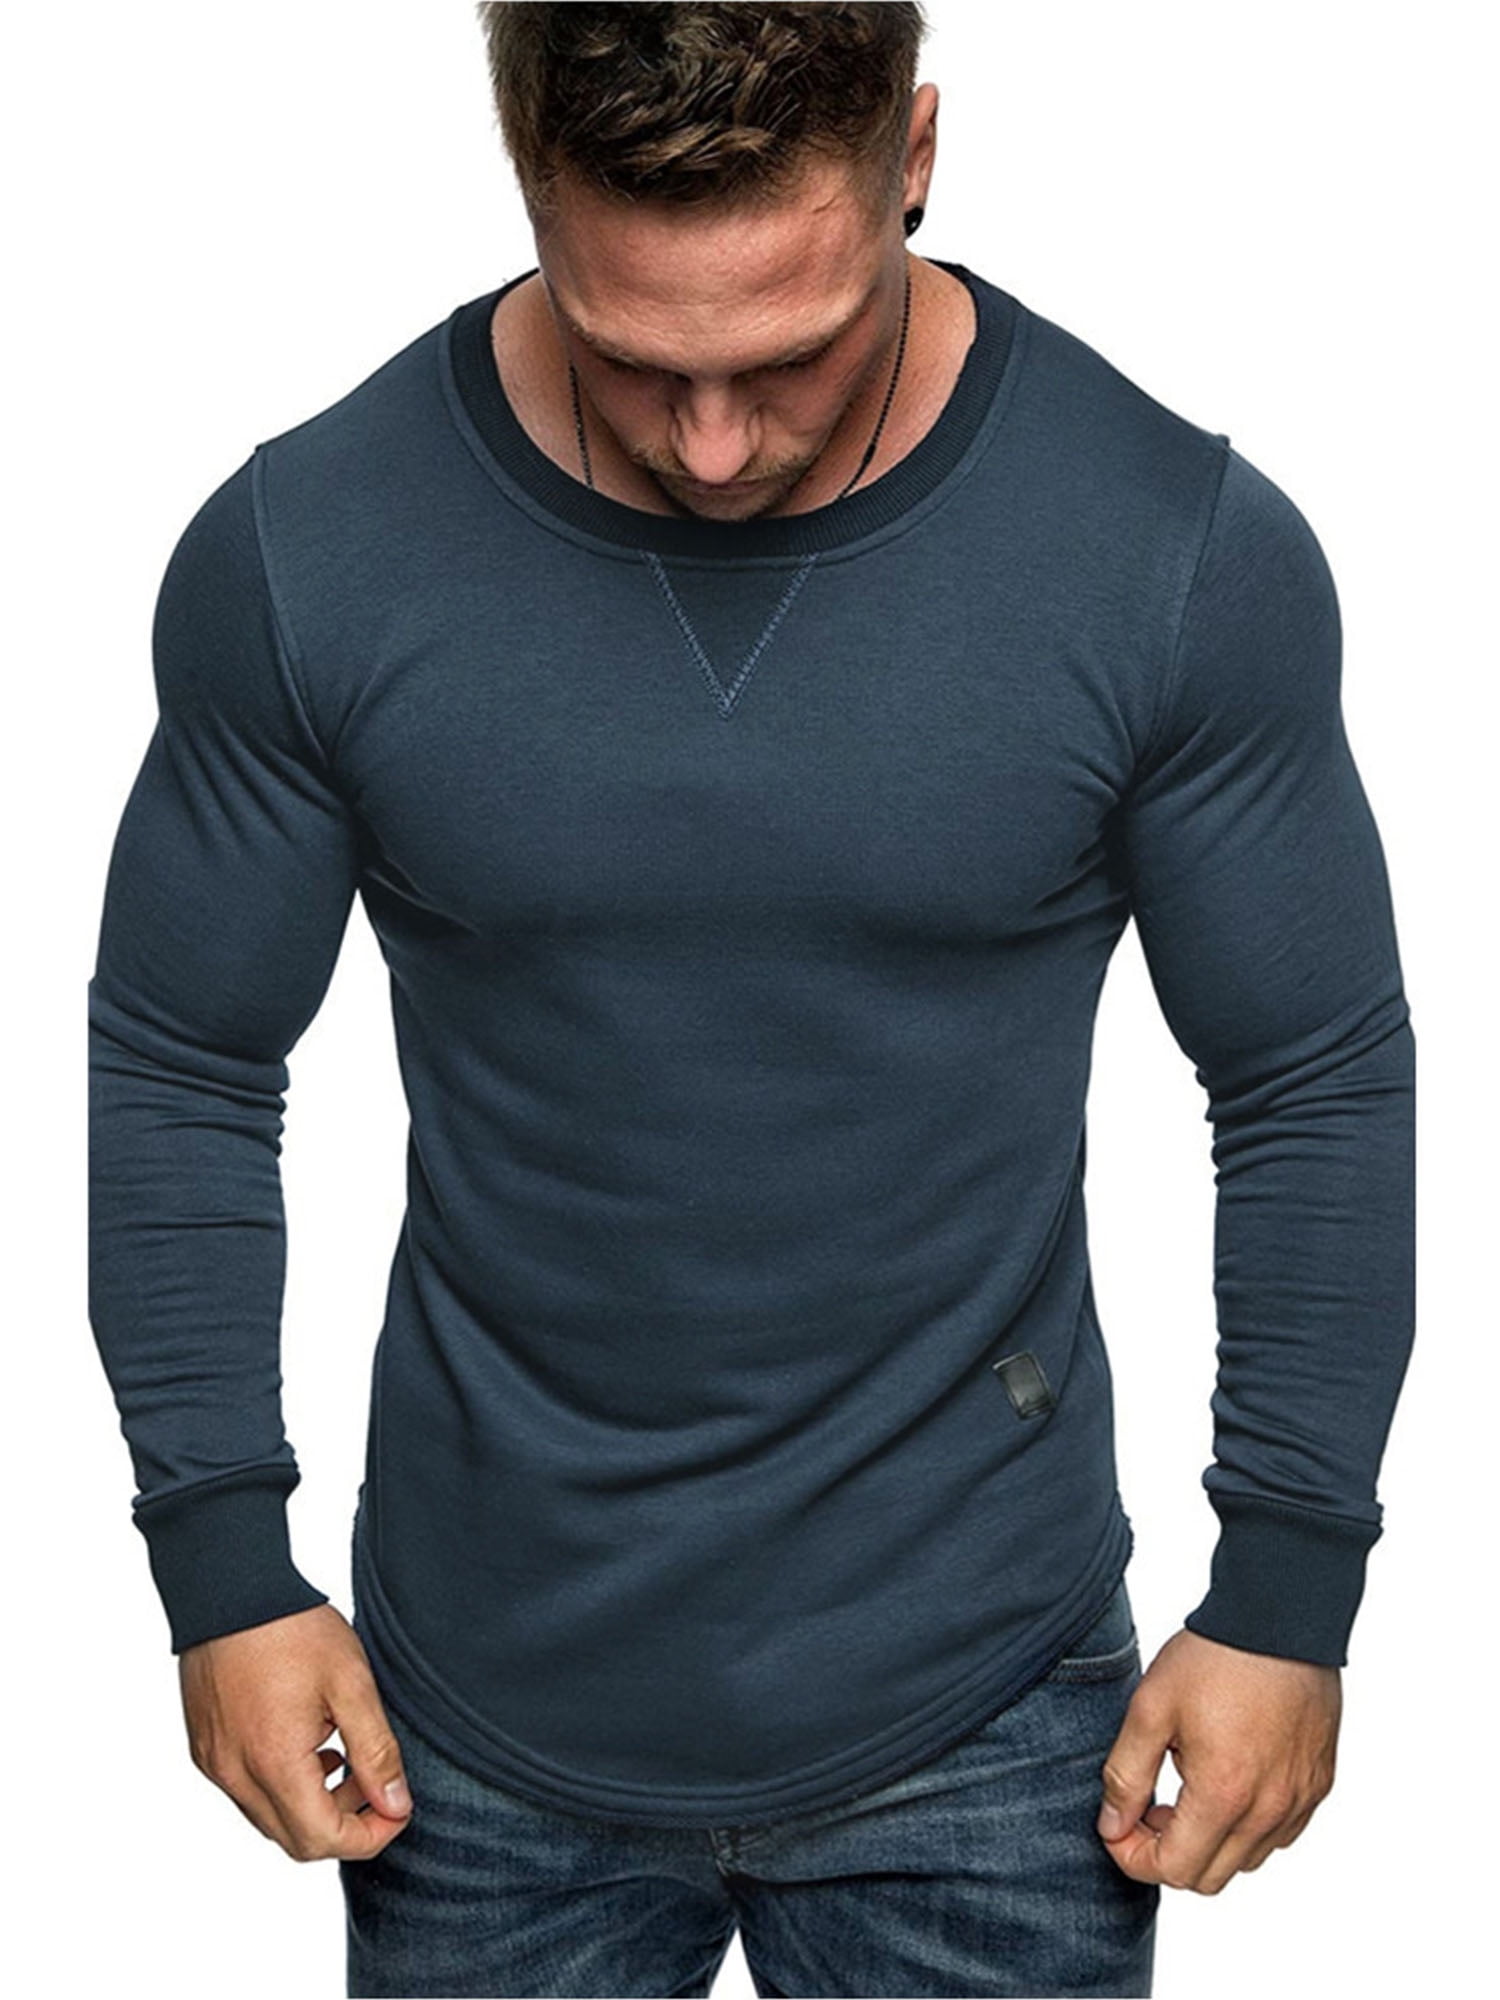 Slim Fit Long Sleeve Casual for Mens Sport Gym Muscle Fitness Tops Active Athletic Tee Shirt Workout Tops - Walmart.com